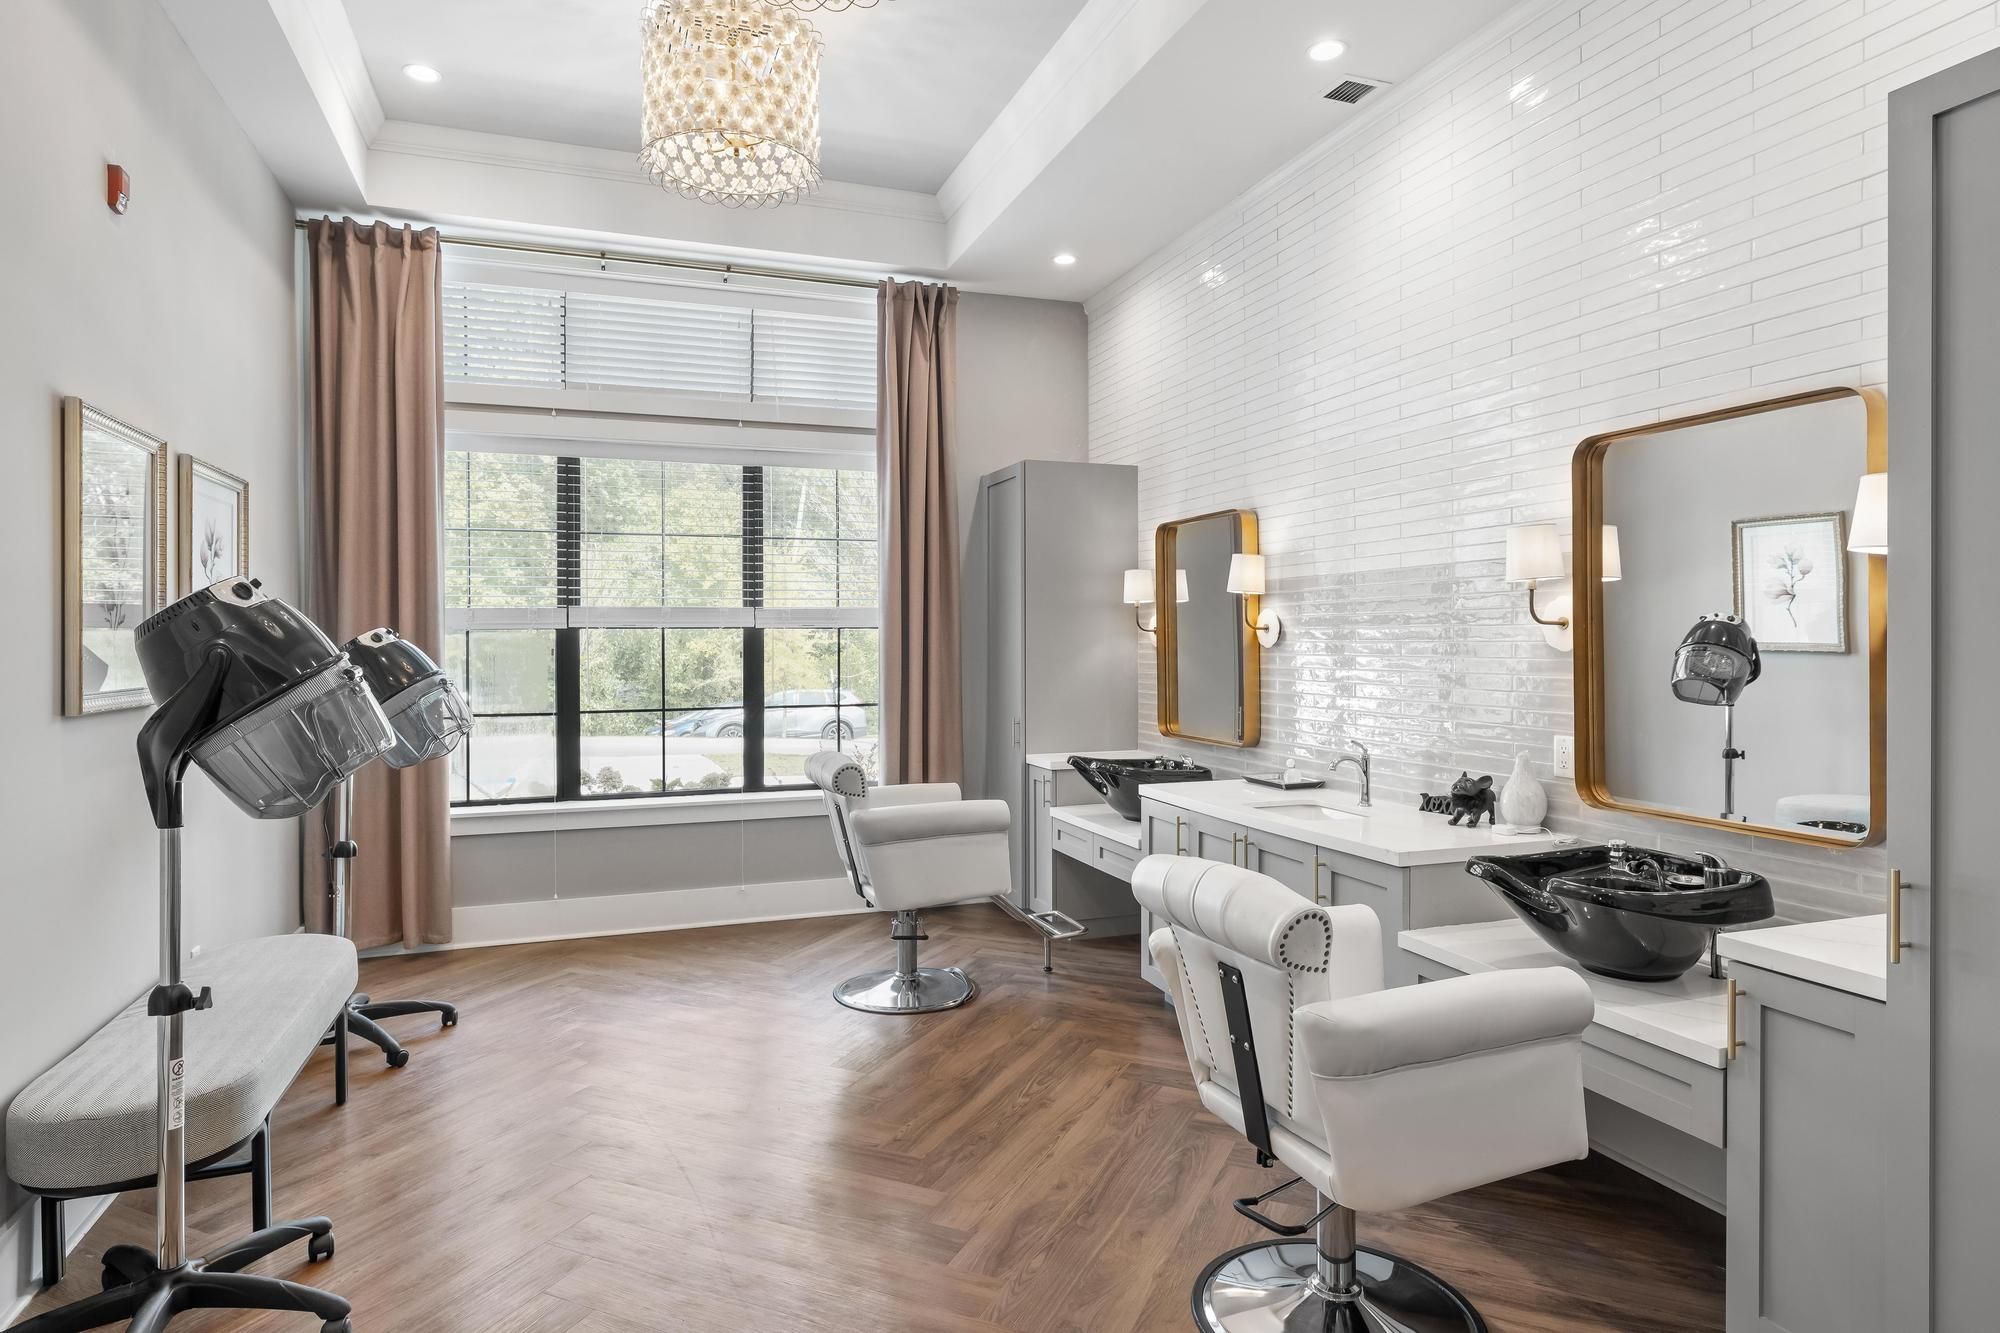 The Preserve at Meridian salon and barbershop